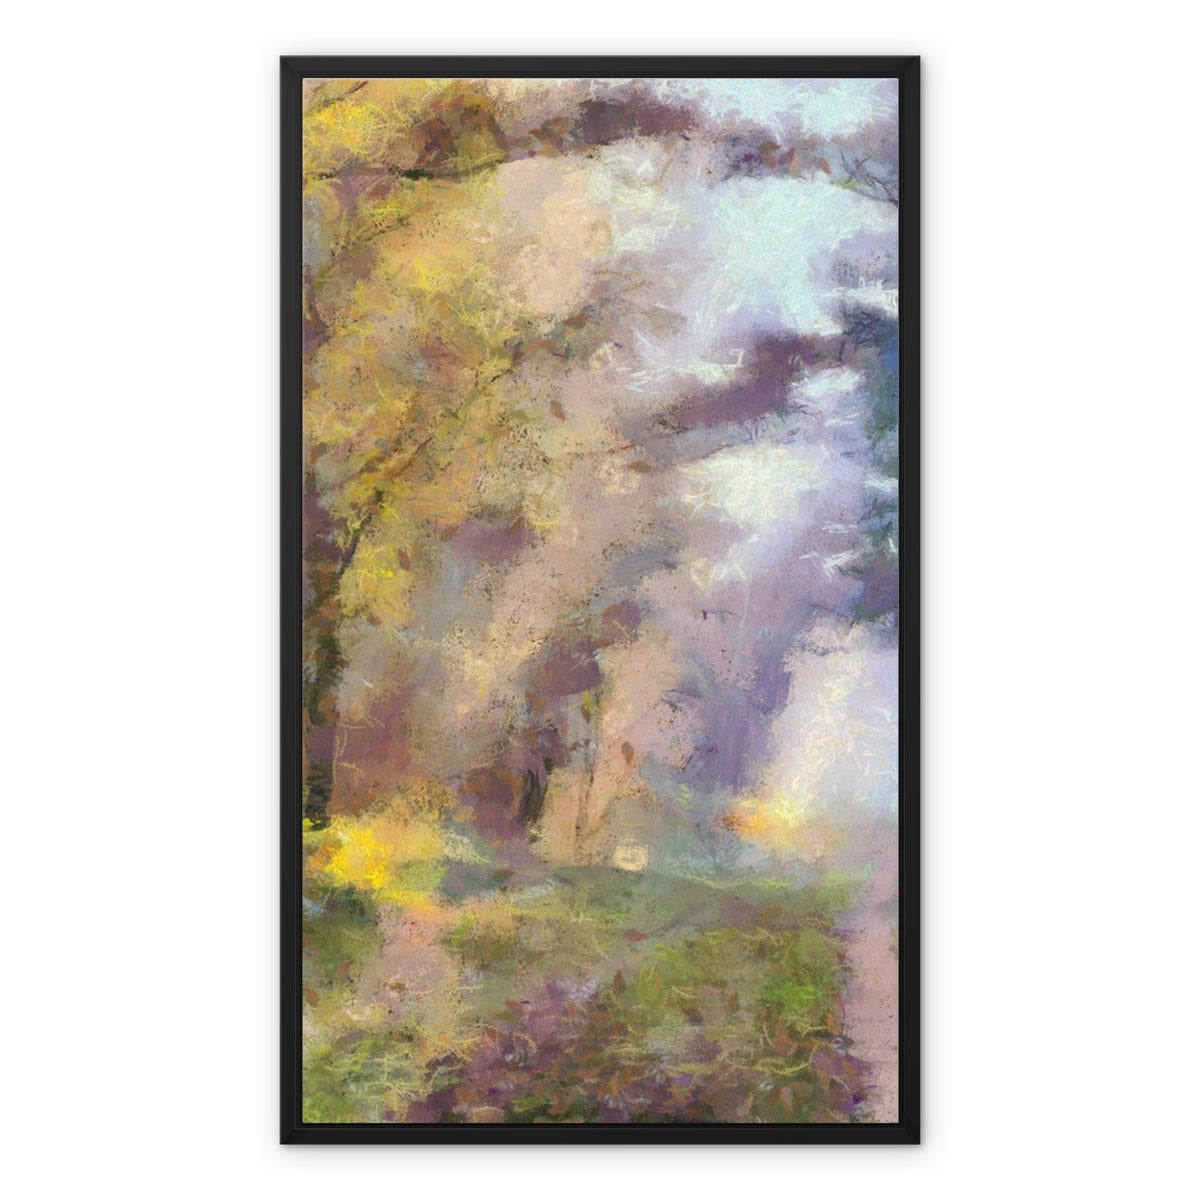 Early Morning Strole in the Woods Framed Canvas